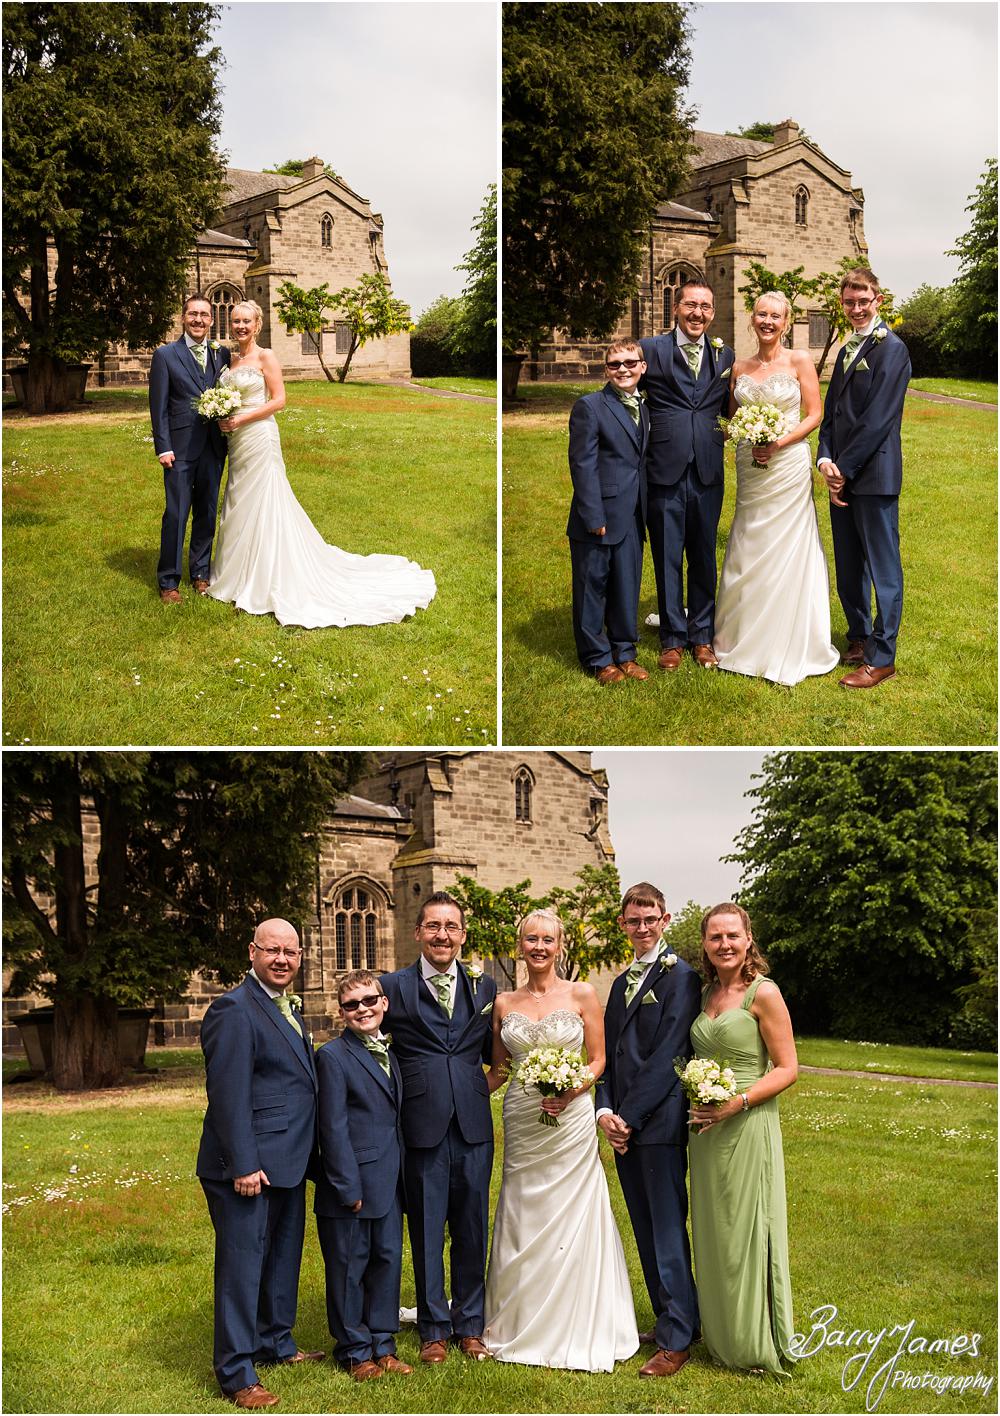 Relaxed traditional group photographs in the gardens at St Augustines in Rugeley by Rugeley Wedding Photographers Barry James